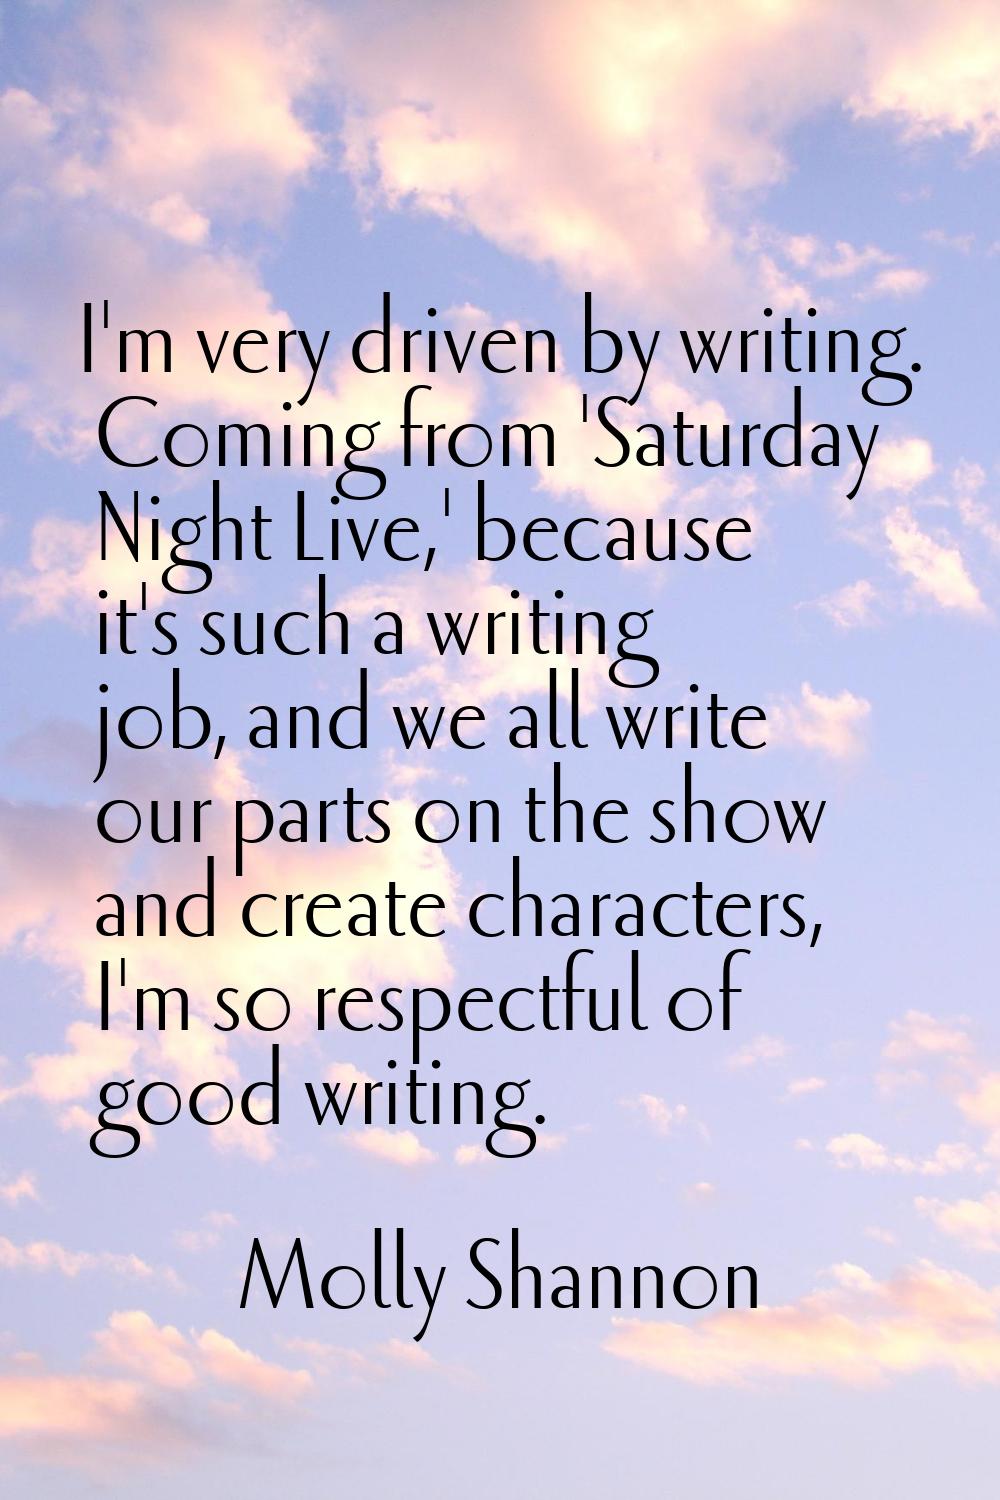 I'm very driven by writing. Coming from 'Saturday Night Live,' because it's such a writing job, and